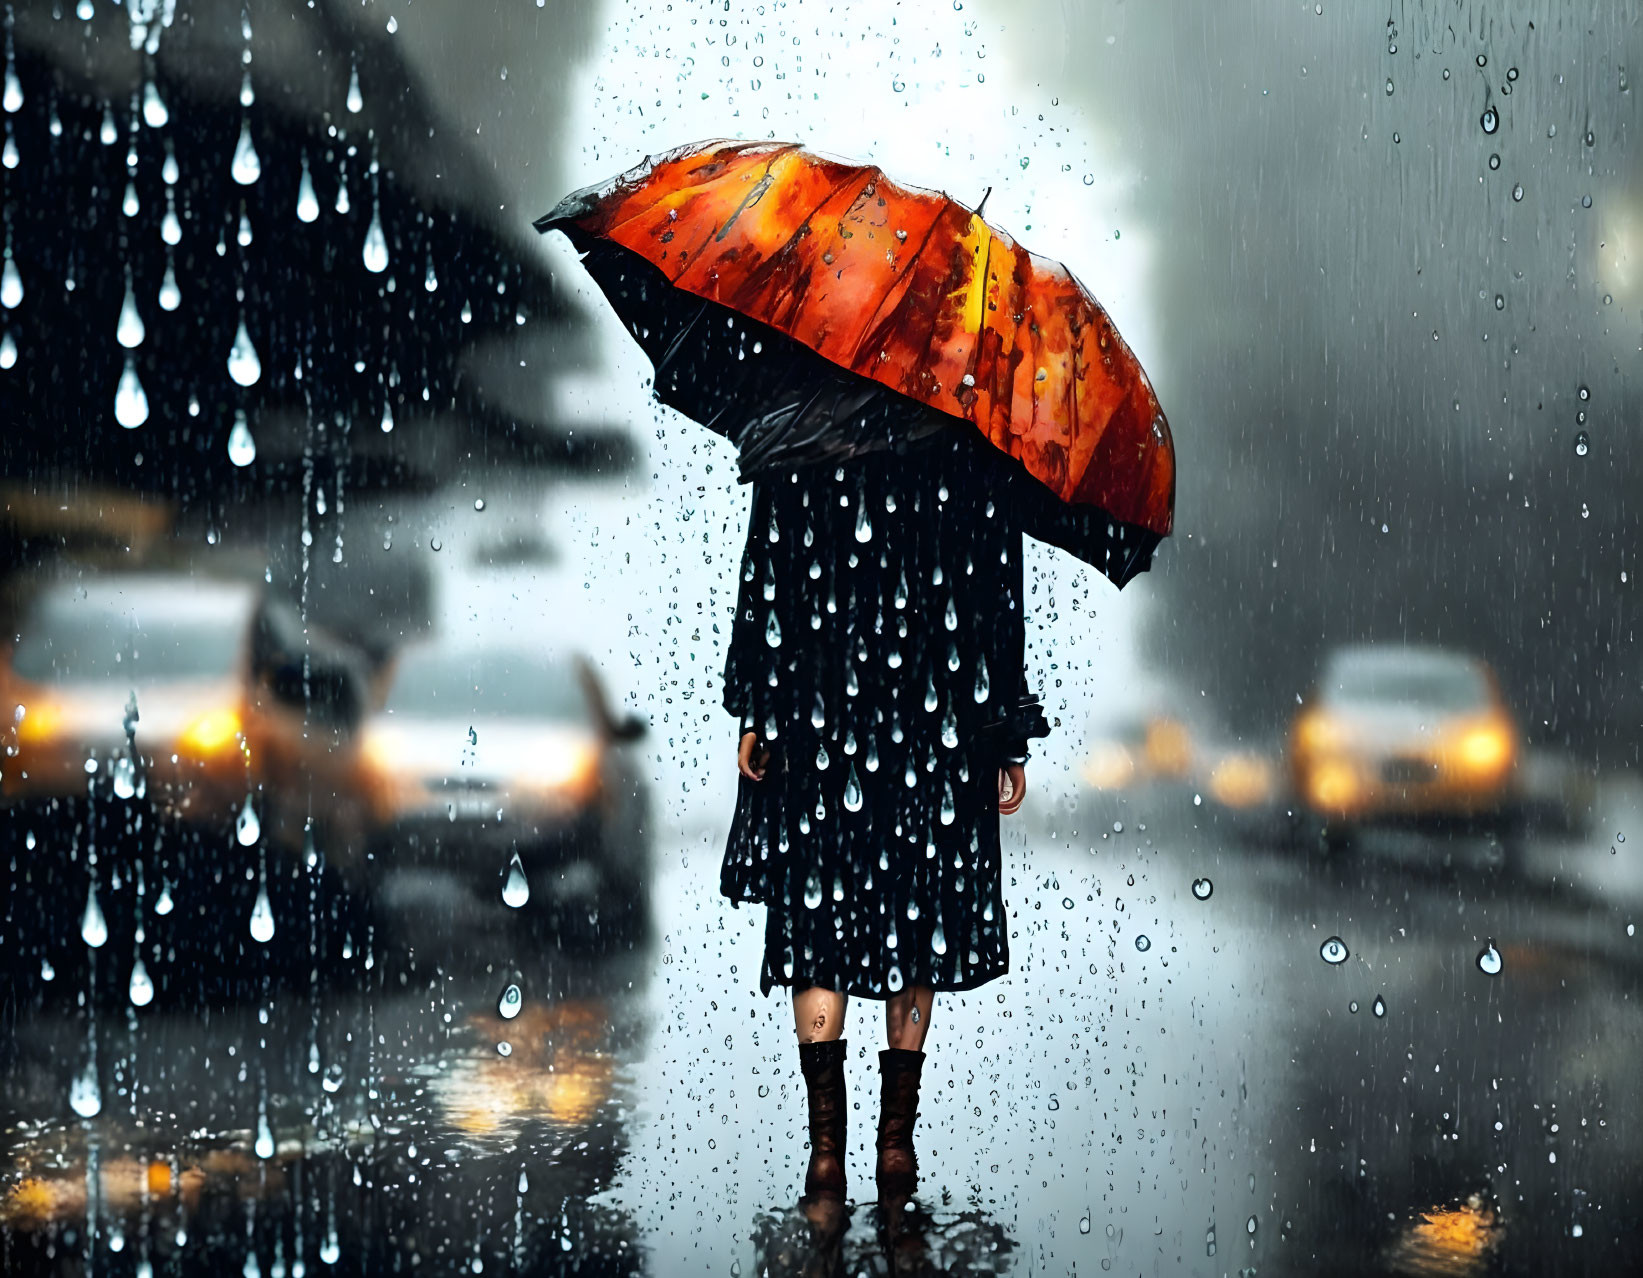 Colorful umbrella person standing on wet street in the rain with blurred cars.